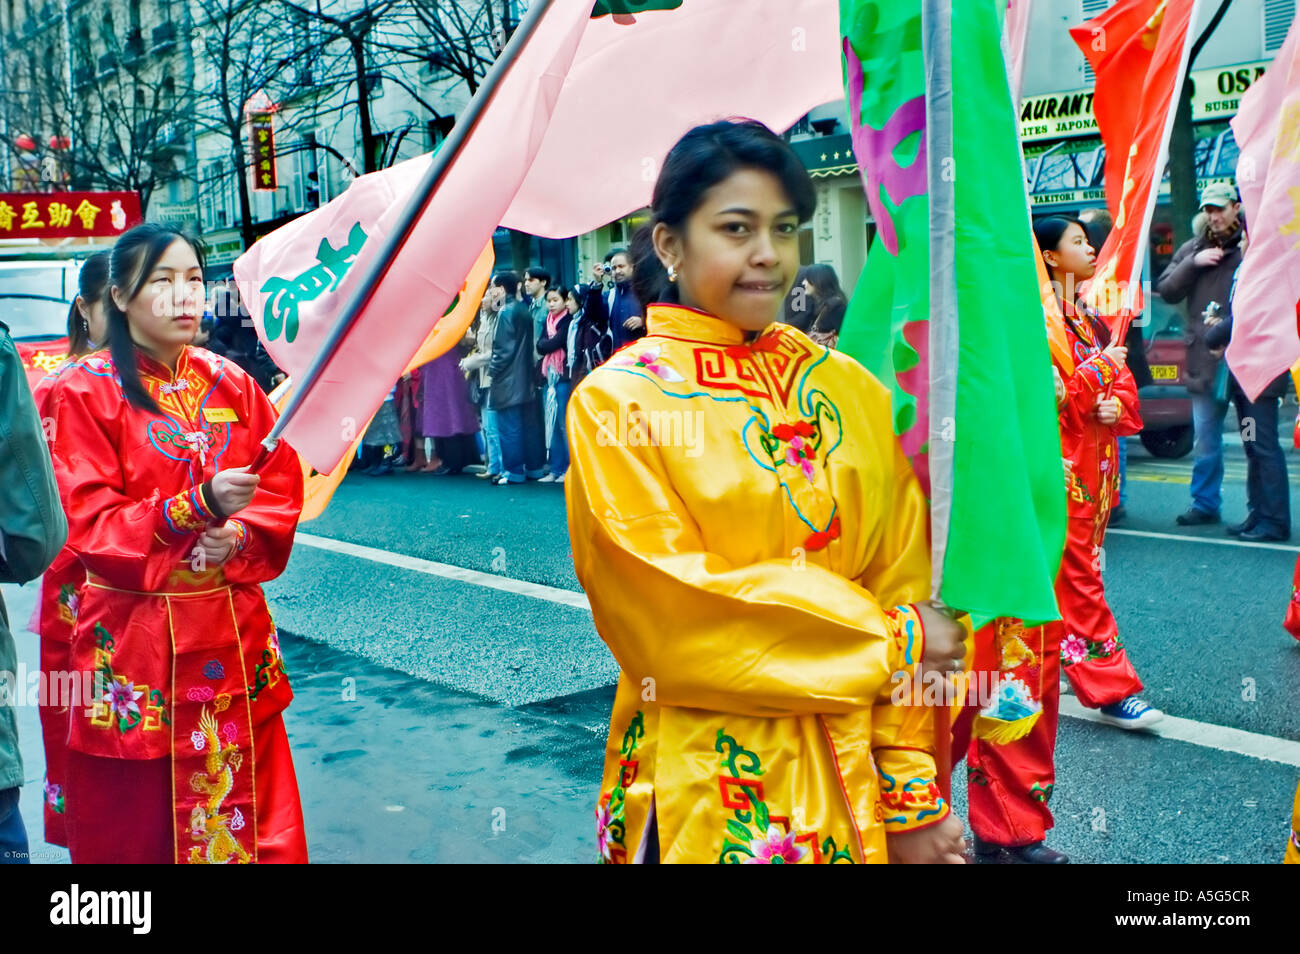 Paris France, People, Street Scene French Asian Female Teens in Traditional Costumes Parading in 'Chinese new years' Carnival in Street Stock Photo